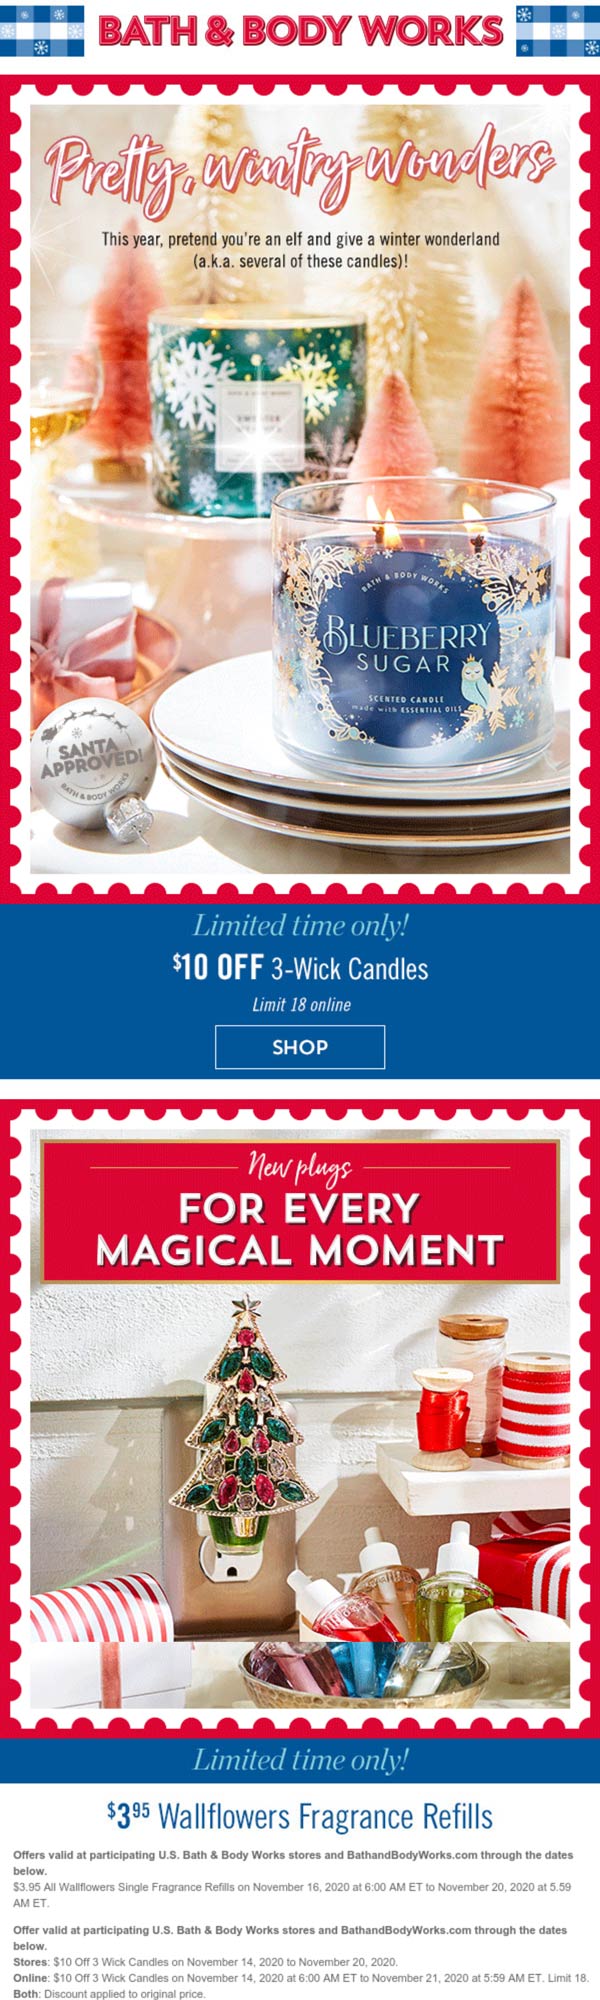 Bath & Body Works stores Coupon  $10 off 3-wick candles at Bath & Body Works, ditto online #bathbodyworks 